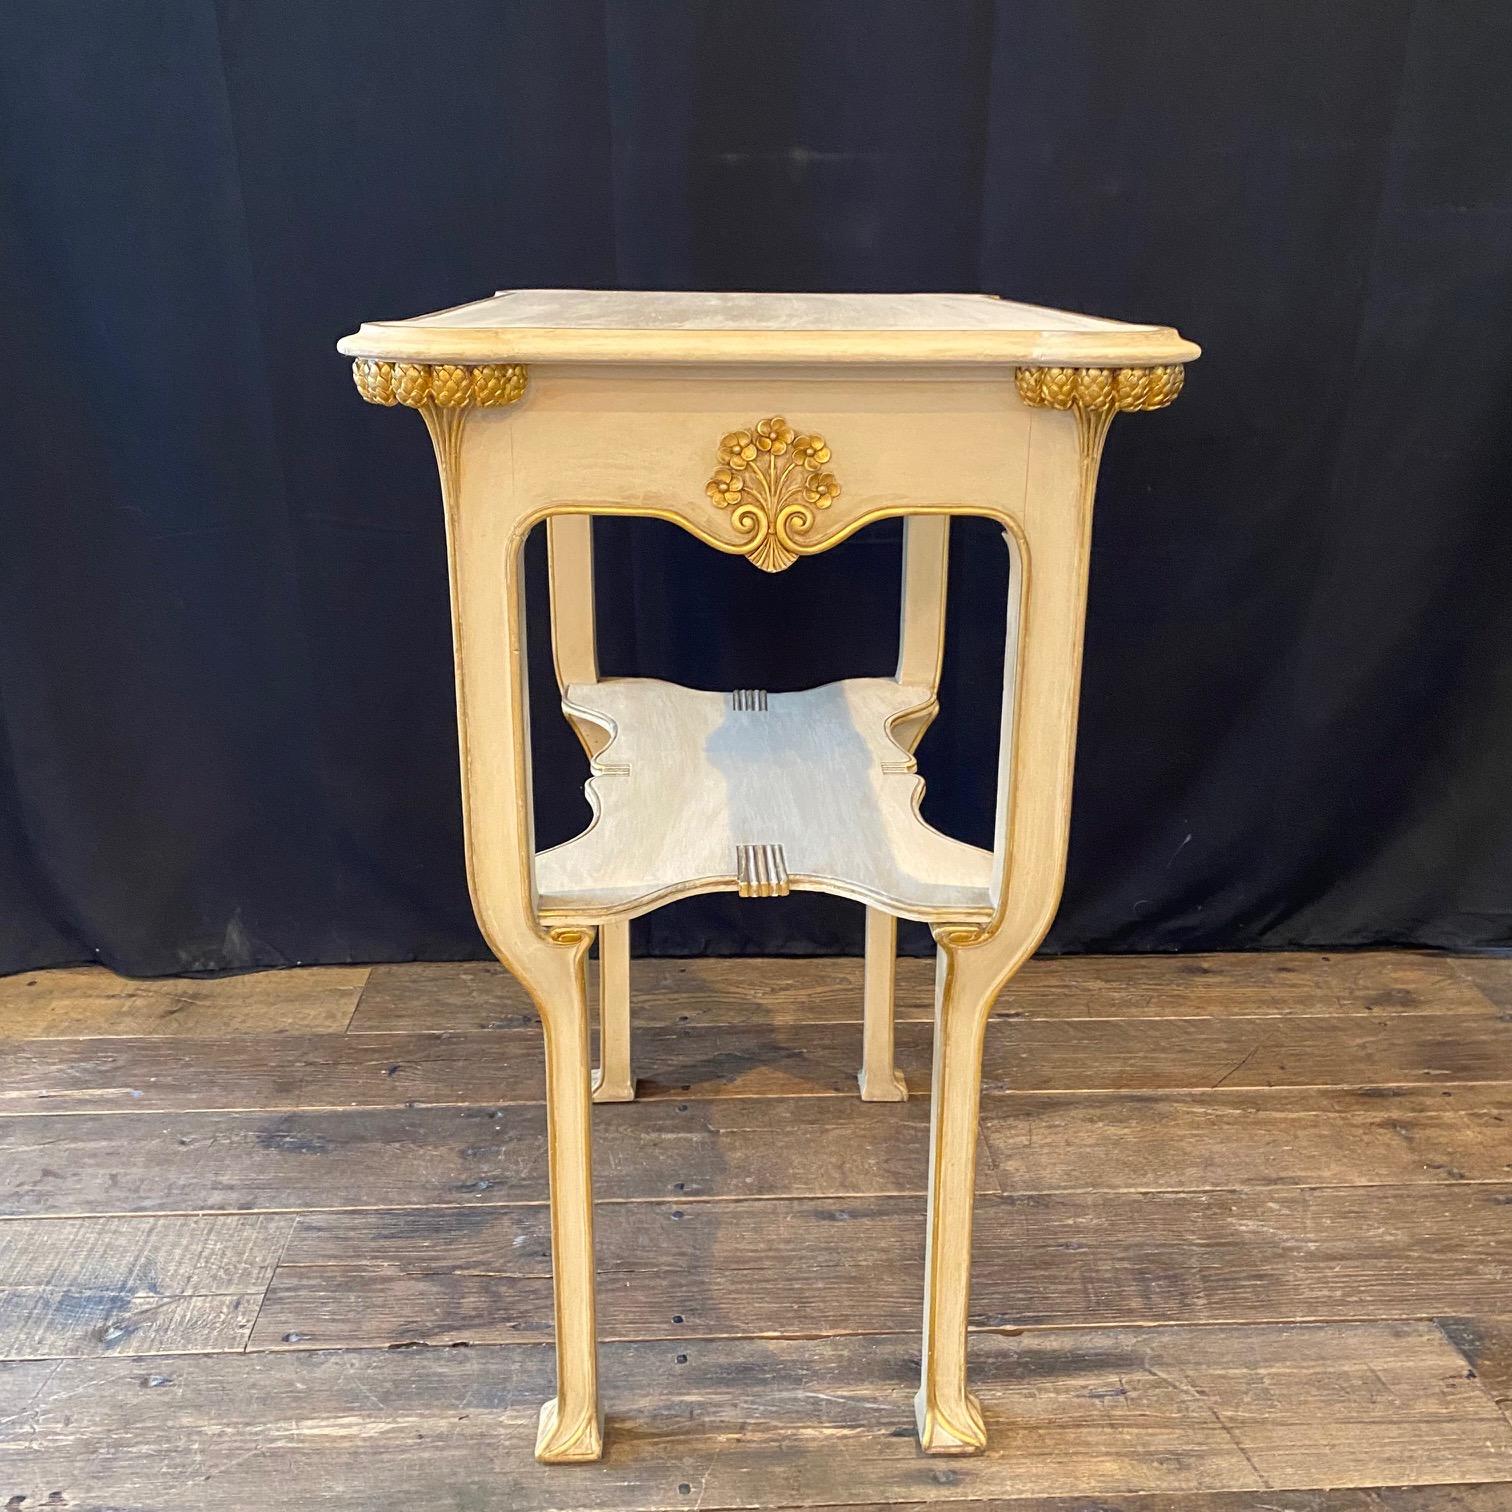 Lovely and elegant Art Nouveau Italian side table in neutral off white and gold, of an excellent smaller size to serve in any room of the home. Can be sold separately; part of an 11-piece early 20th century Art Nouveau complete original salon suite